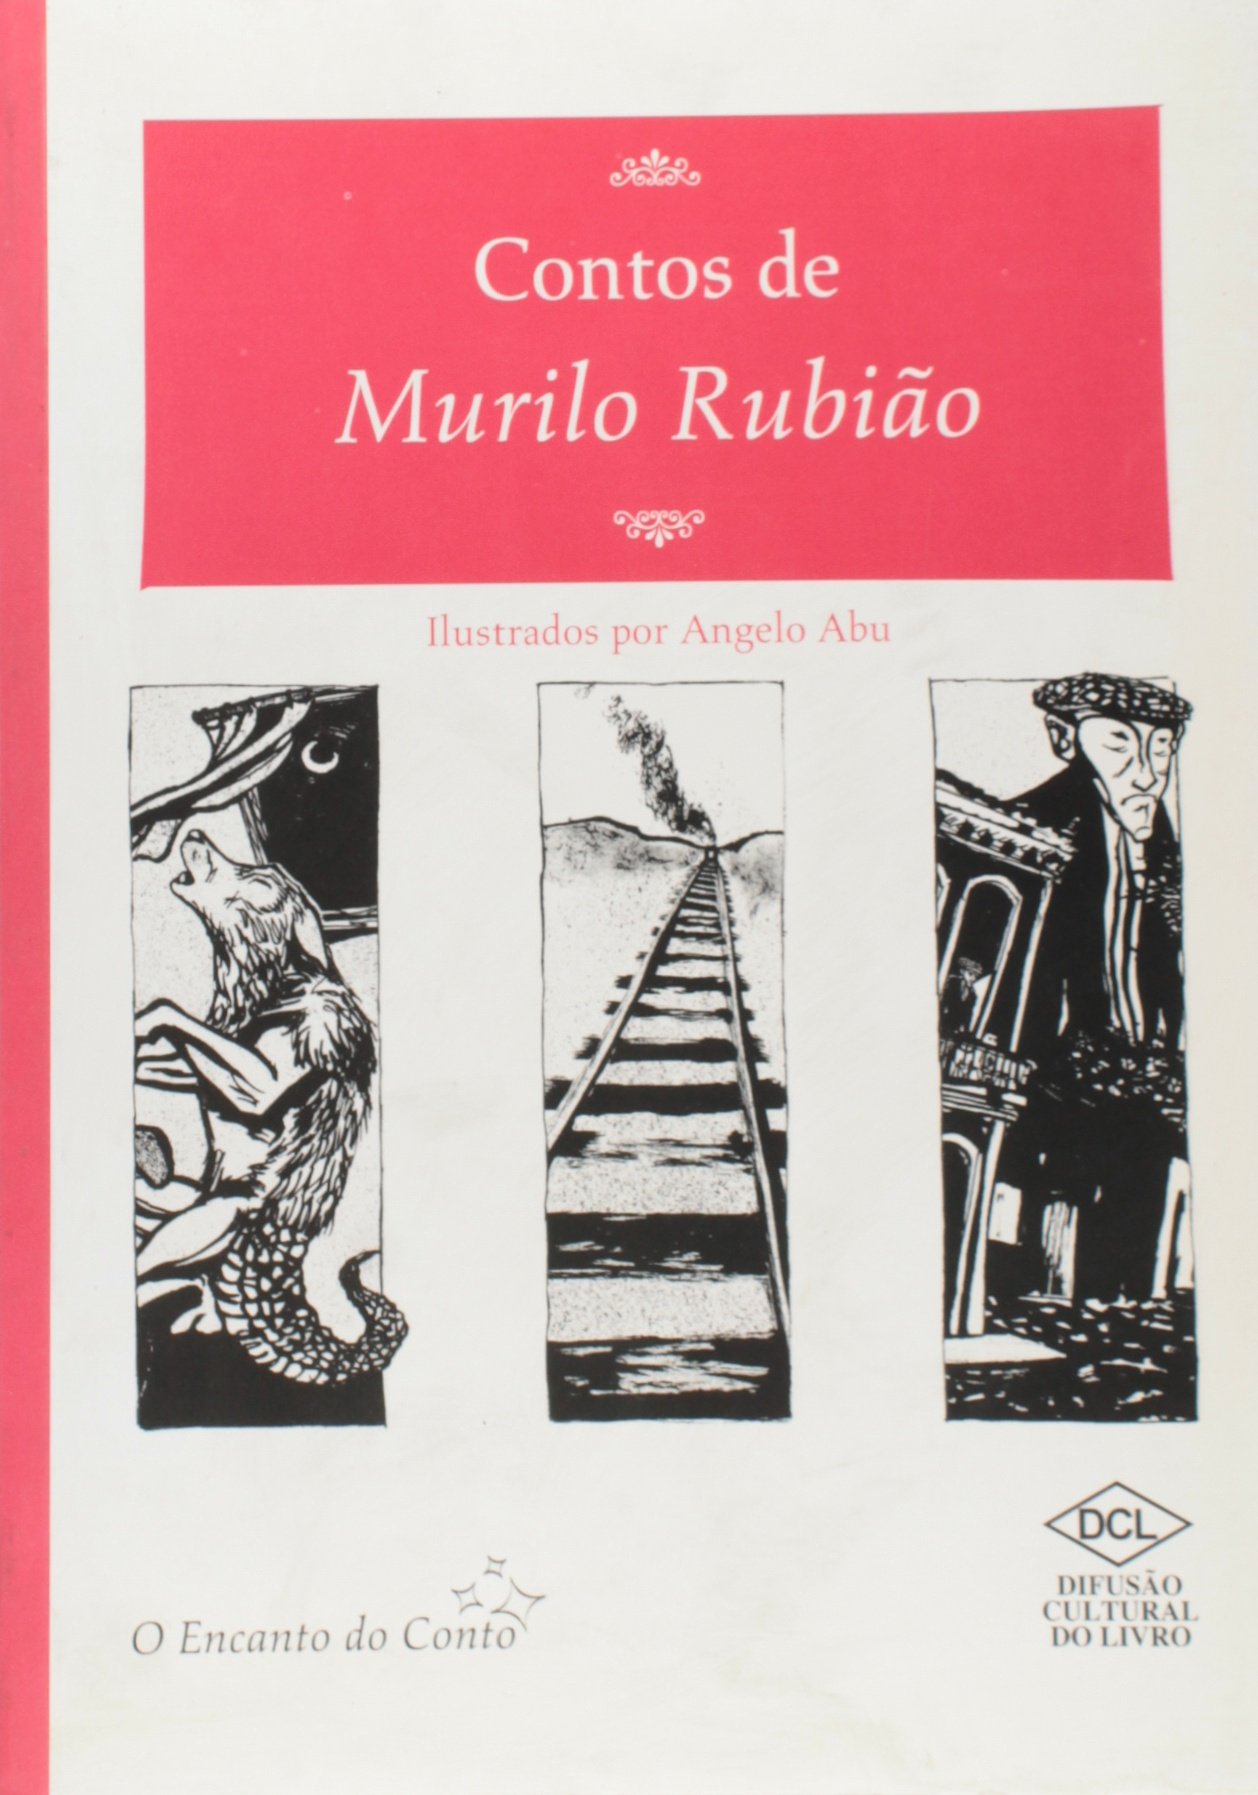 Stories by Murilo Rubião – llustrated by Angelo Abu (2003)